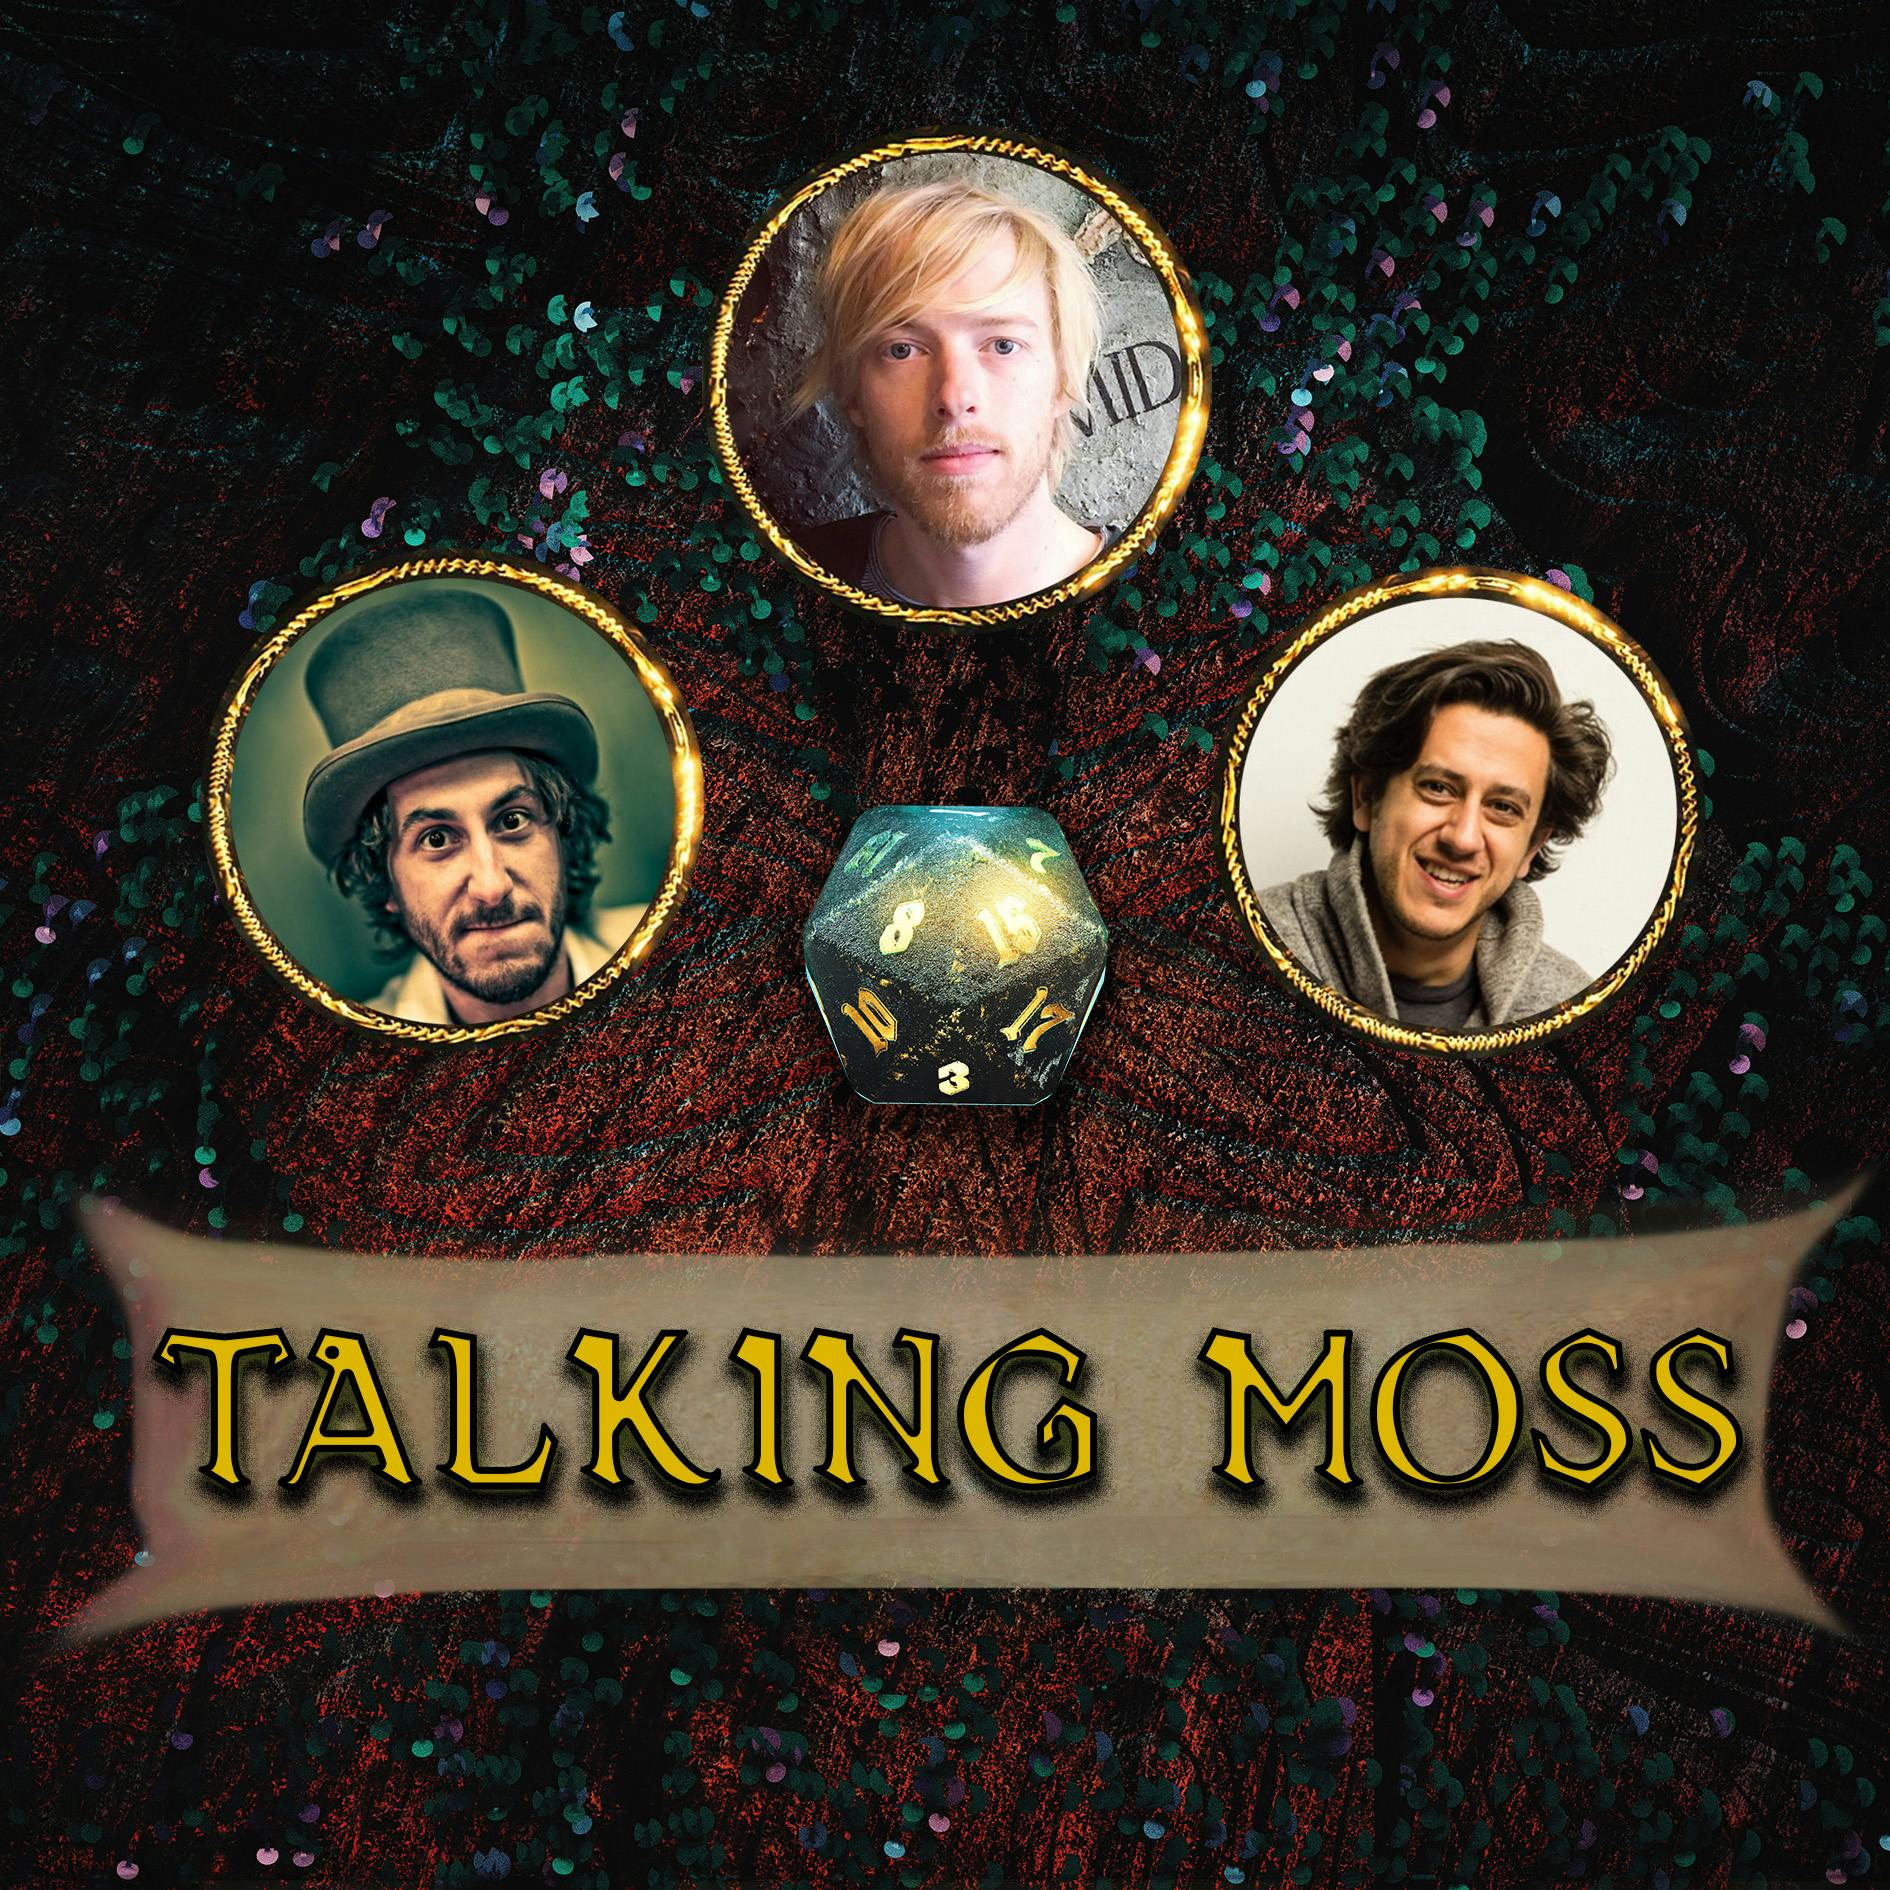 Talking Moss I Trivial Pursuit and some Act III insights